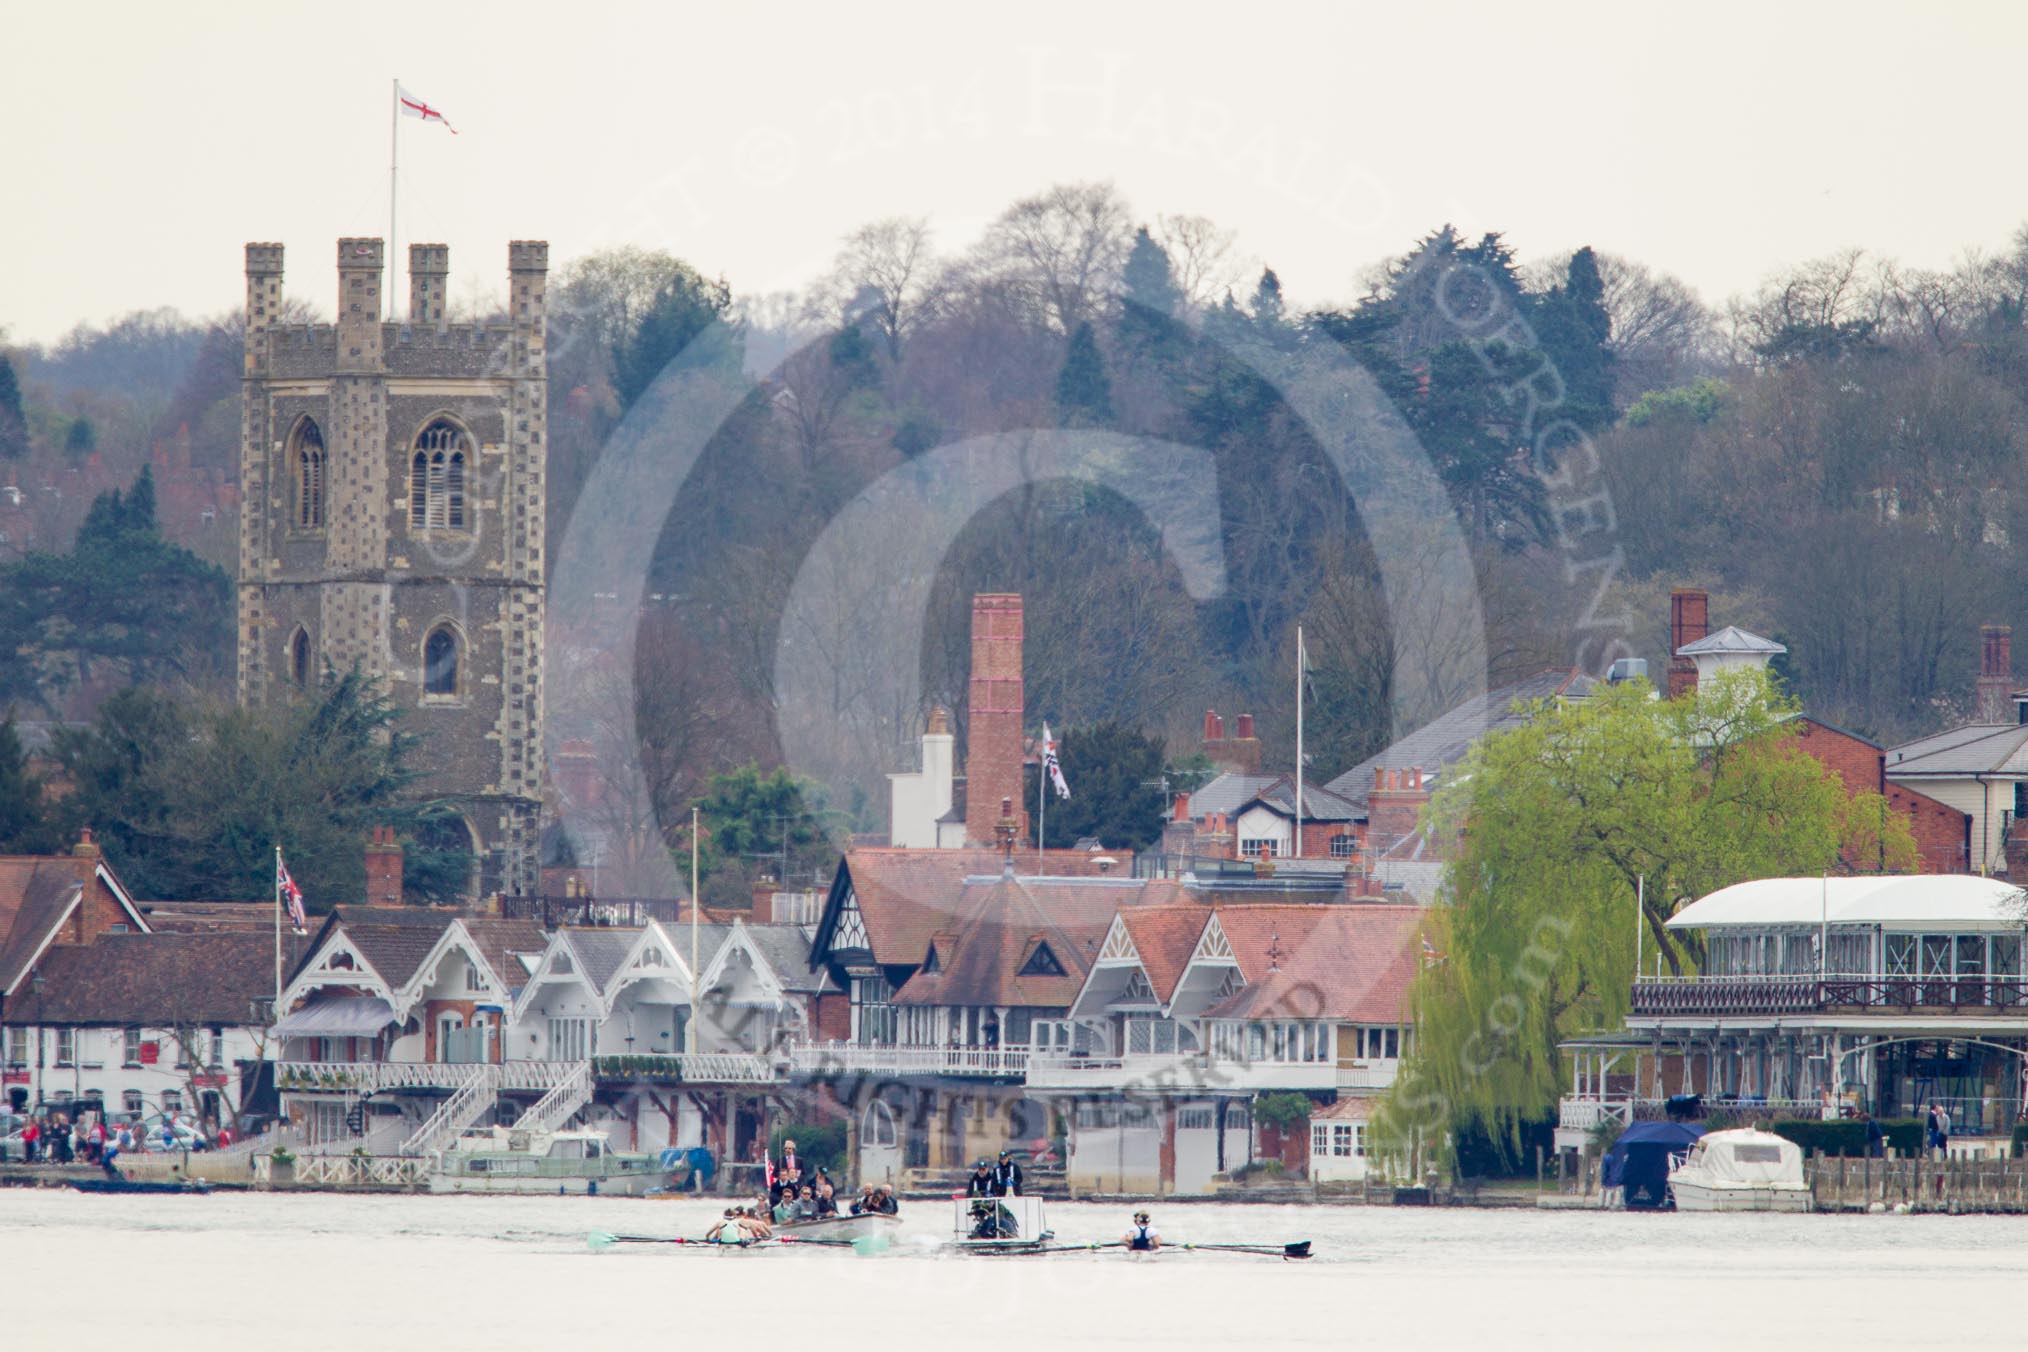 The Women's Boat Race and Henley Boat Races 2014: The start of the Newton Women's Boat Race at Henley. Oxford is on the right (Bucks) side, following the boats is the umpire's launch and, on the left, a press launch..
River Thames,
Henley-on-Thames,
Buckinghamshire,
United Kingdom,
on 30 March 2014 at 15:12, image #280